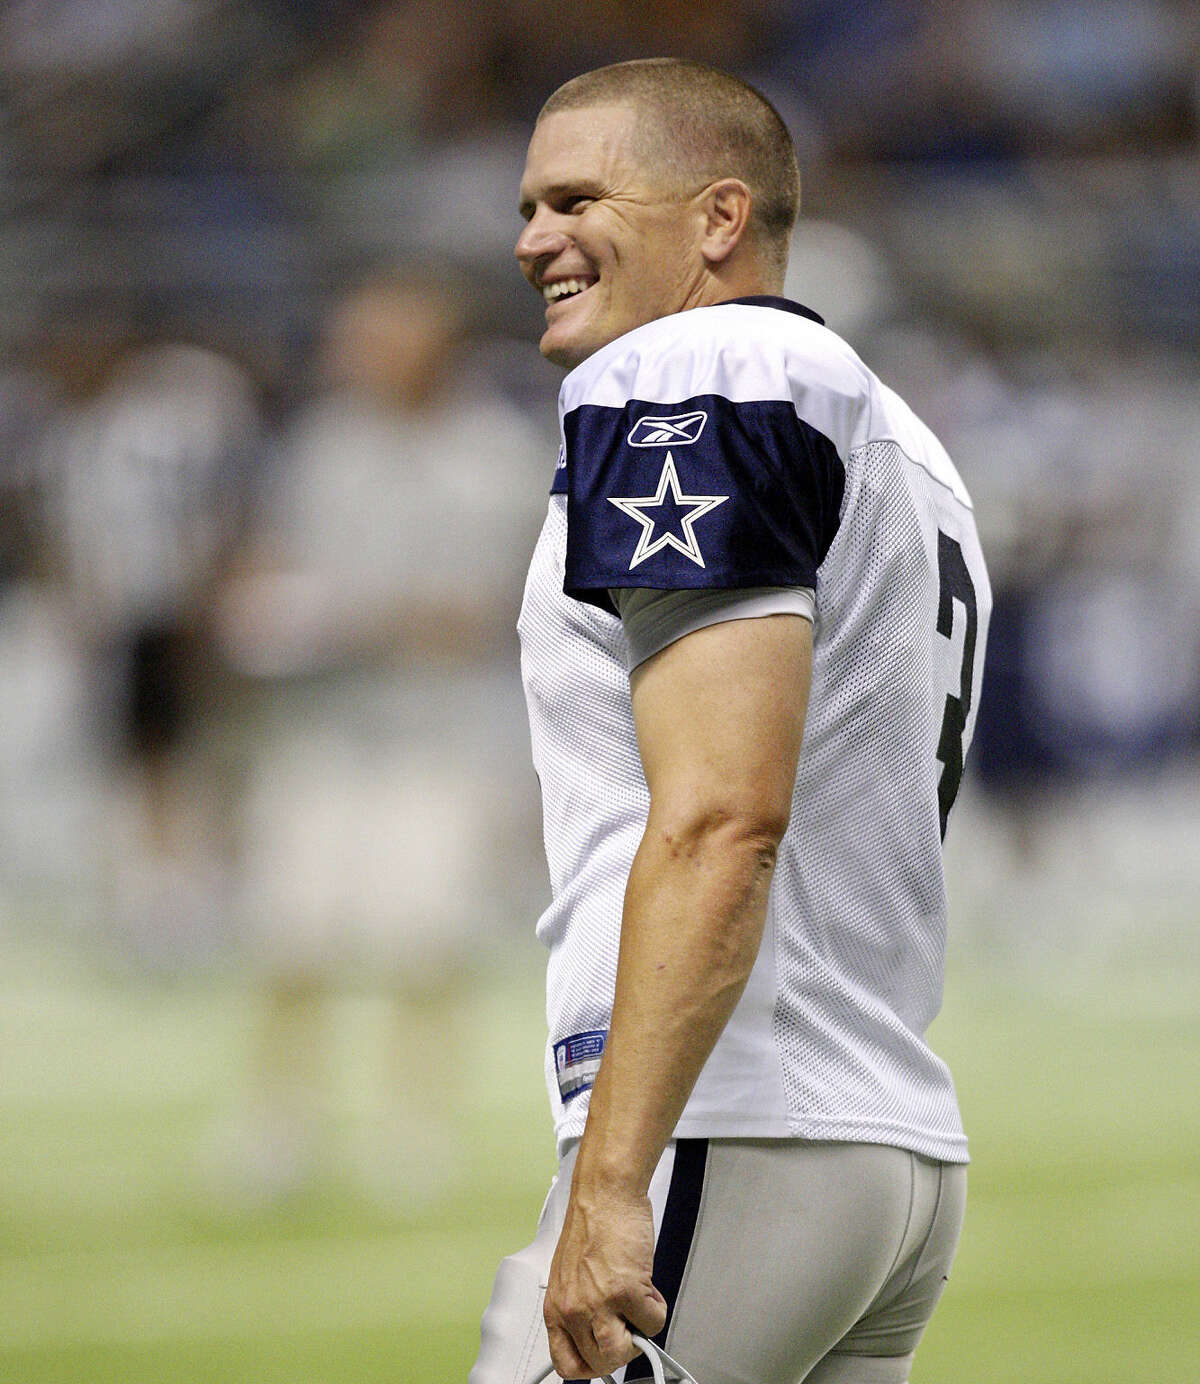 Jon Kitna, shown at Cowboys training camp at the Alamodome in 2011, was coaching high school football before Dallas brought him back at age 41 to serve as a third-string quarterback.